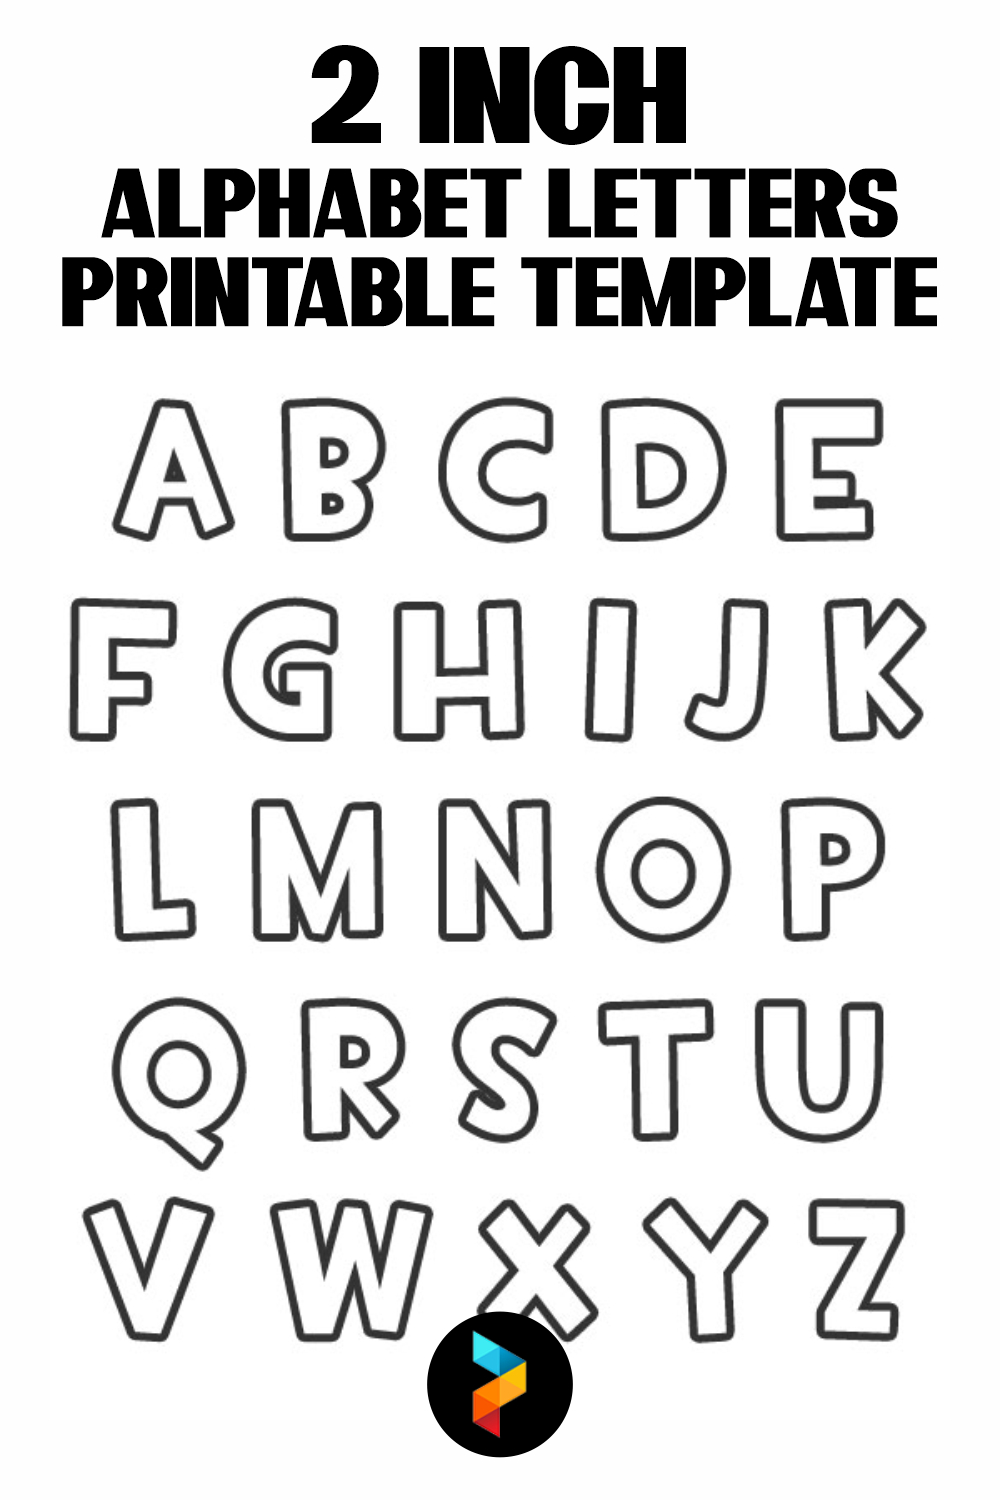 2 Inch Alphabet Letters Printable Template | Printable Letter - Free Printable 2 Inch Alphabet Letters